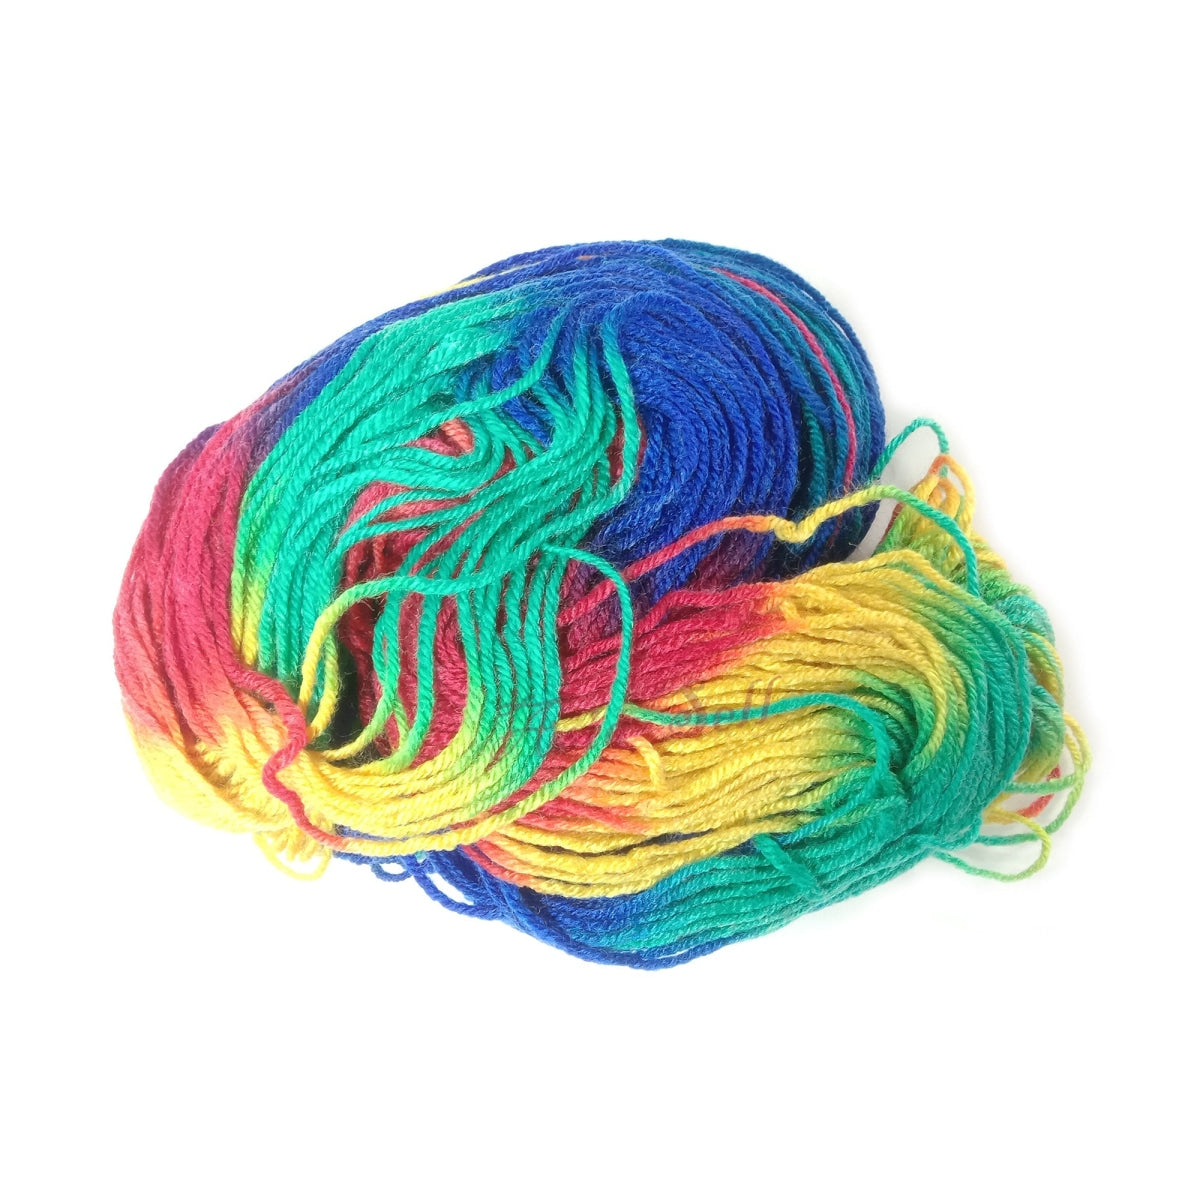 50G Ball Of Knitting Yarn Mixed Colourful Dyed Crochet Thread Multicoloured Craft 1 Clothing Buttons